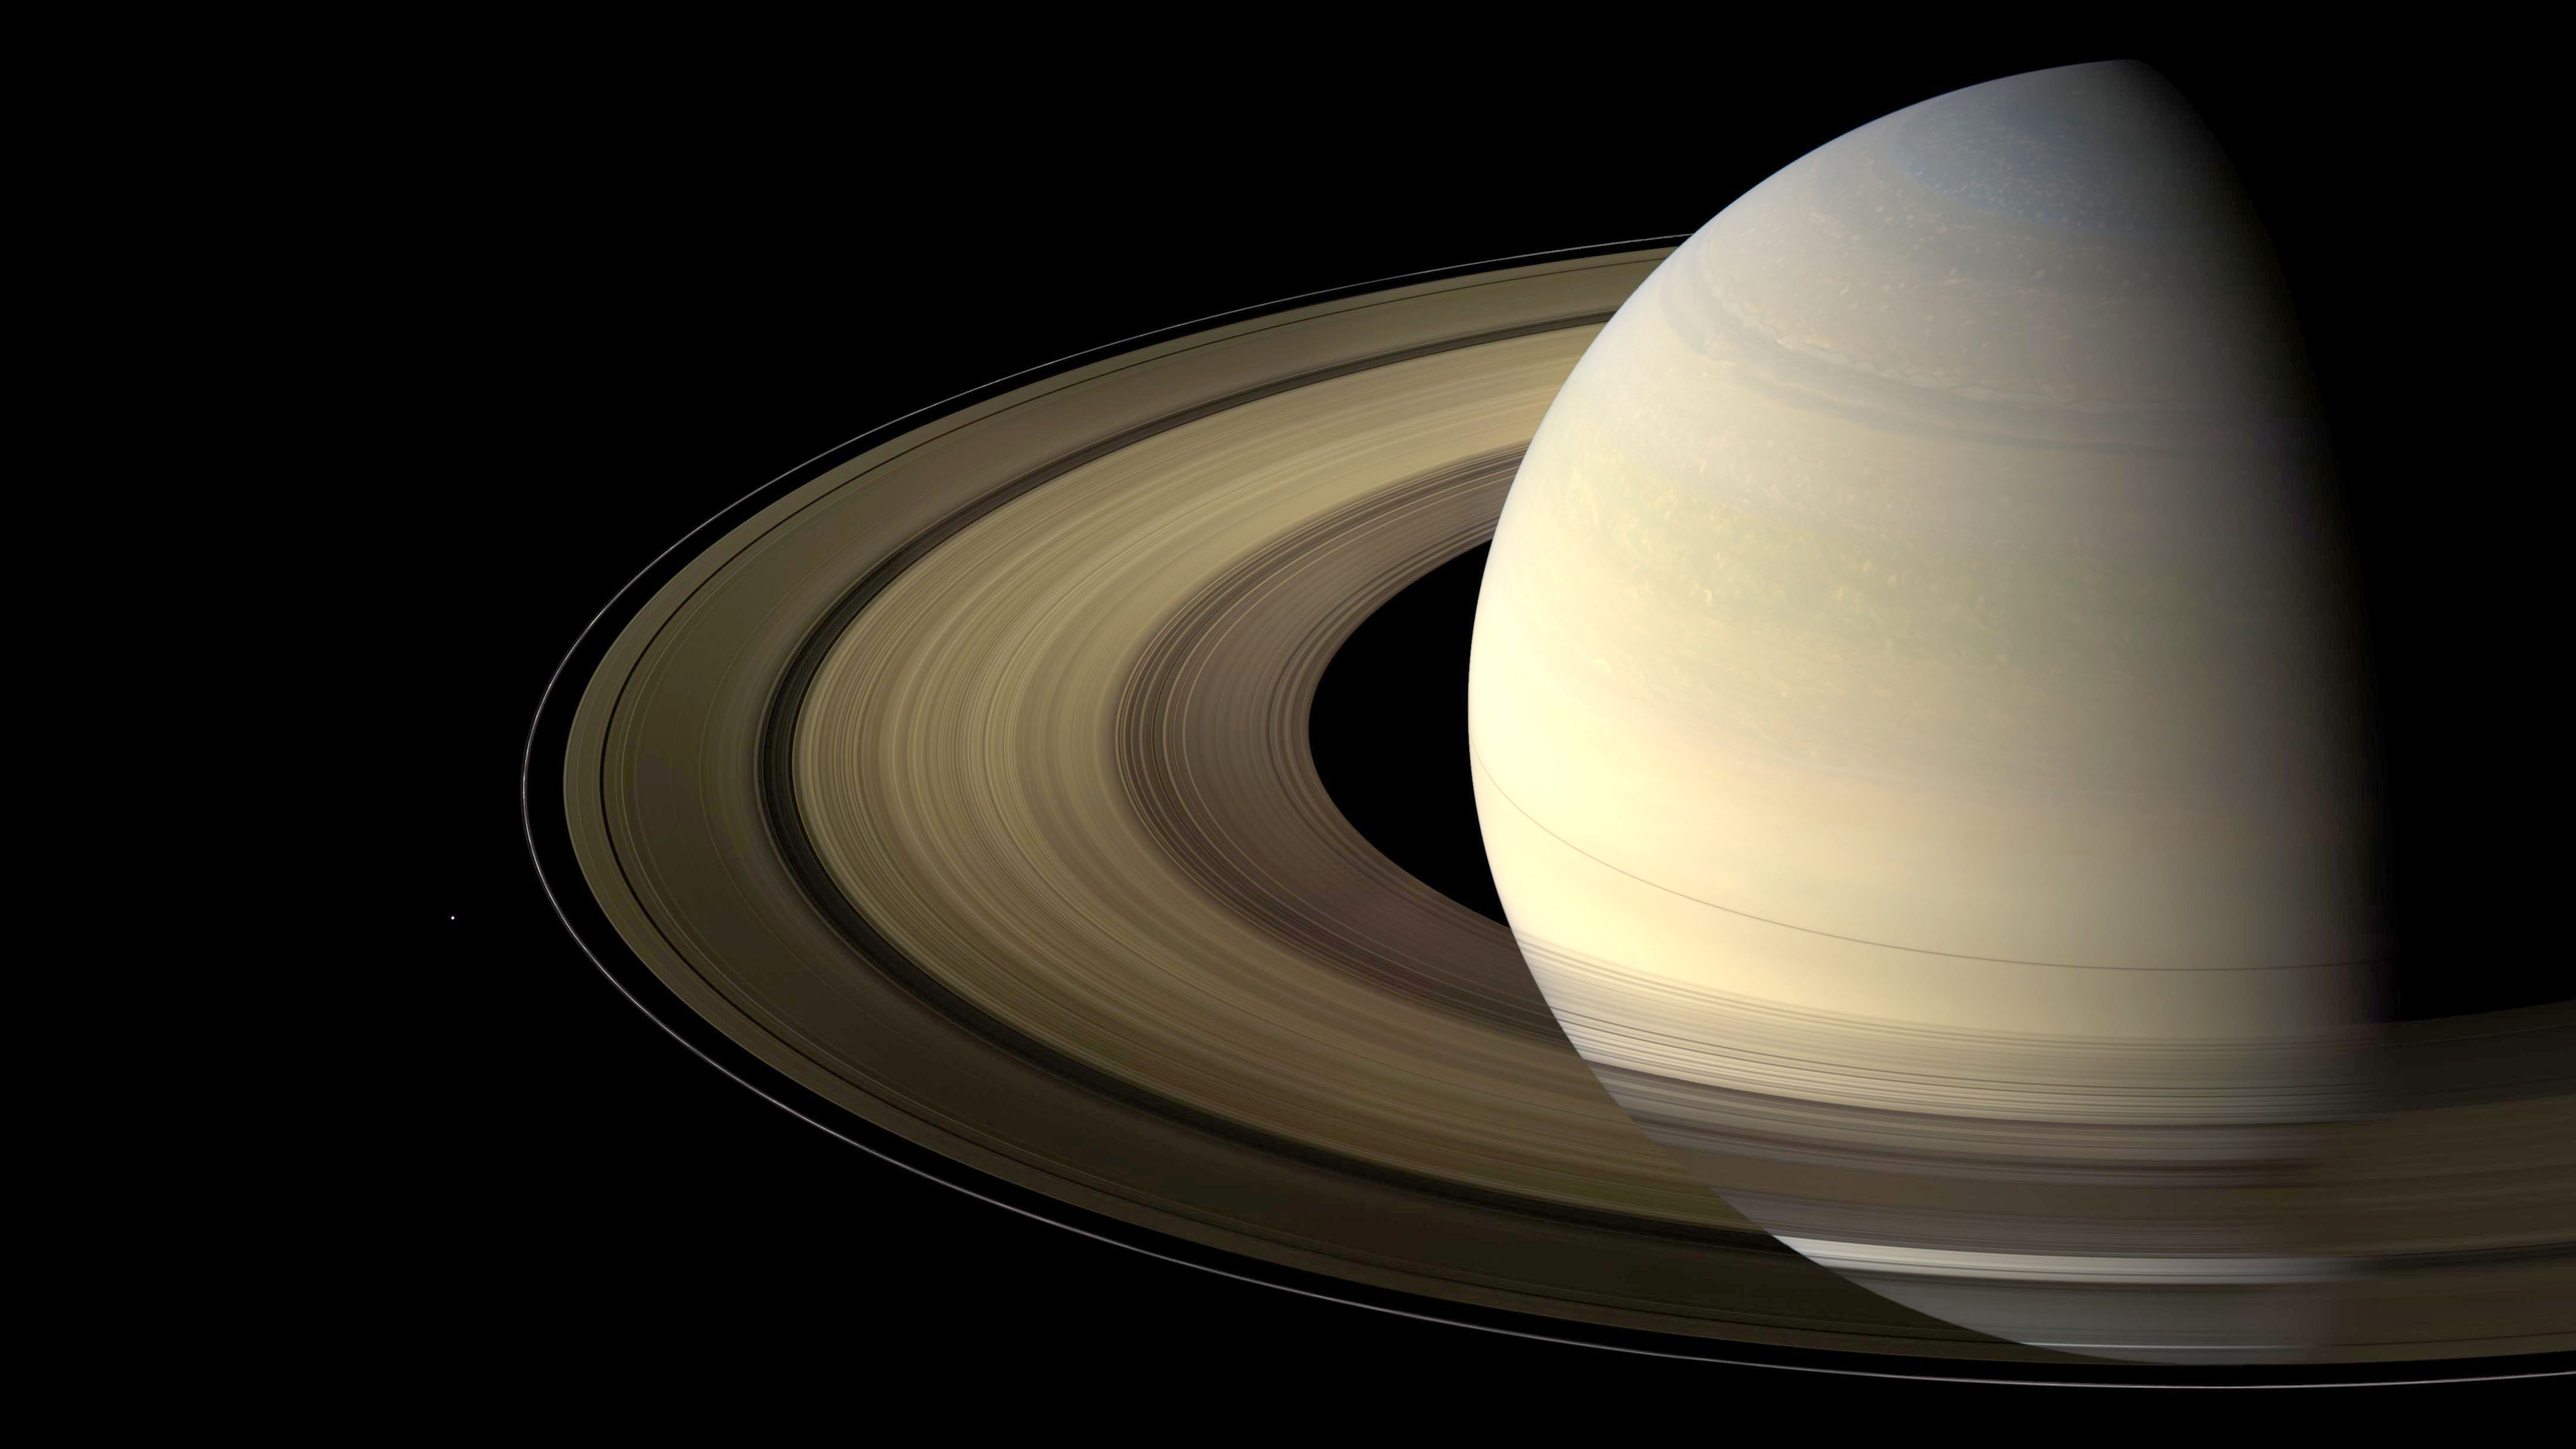 Cassini scientist for a day essay contest for high school